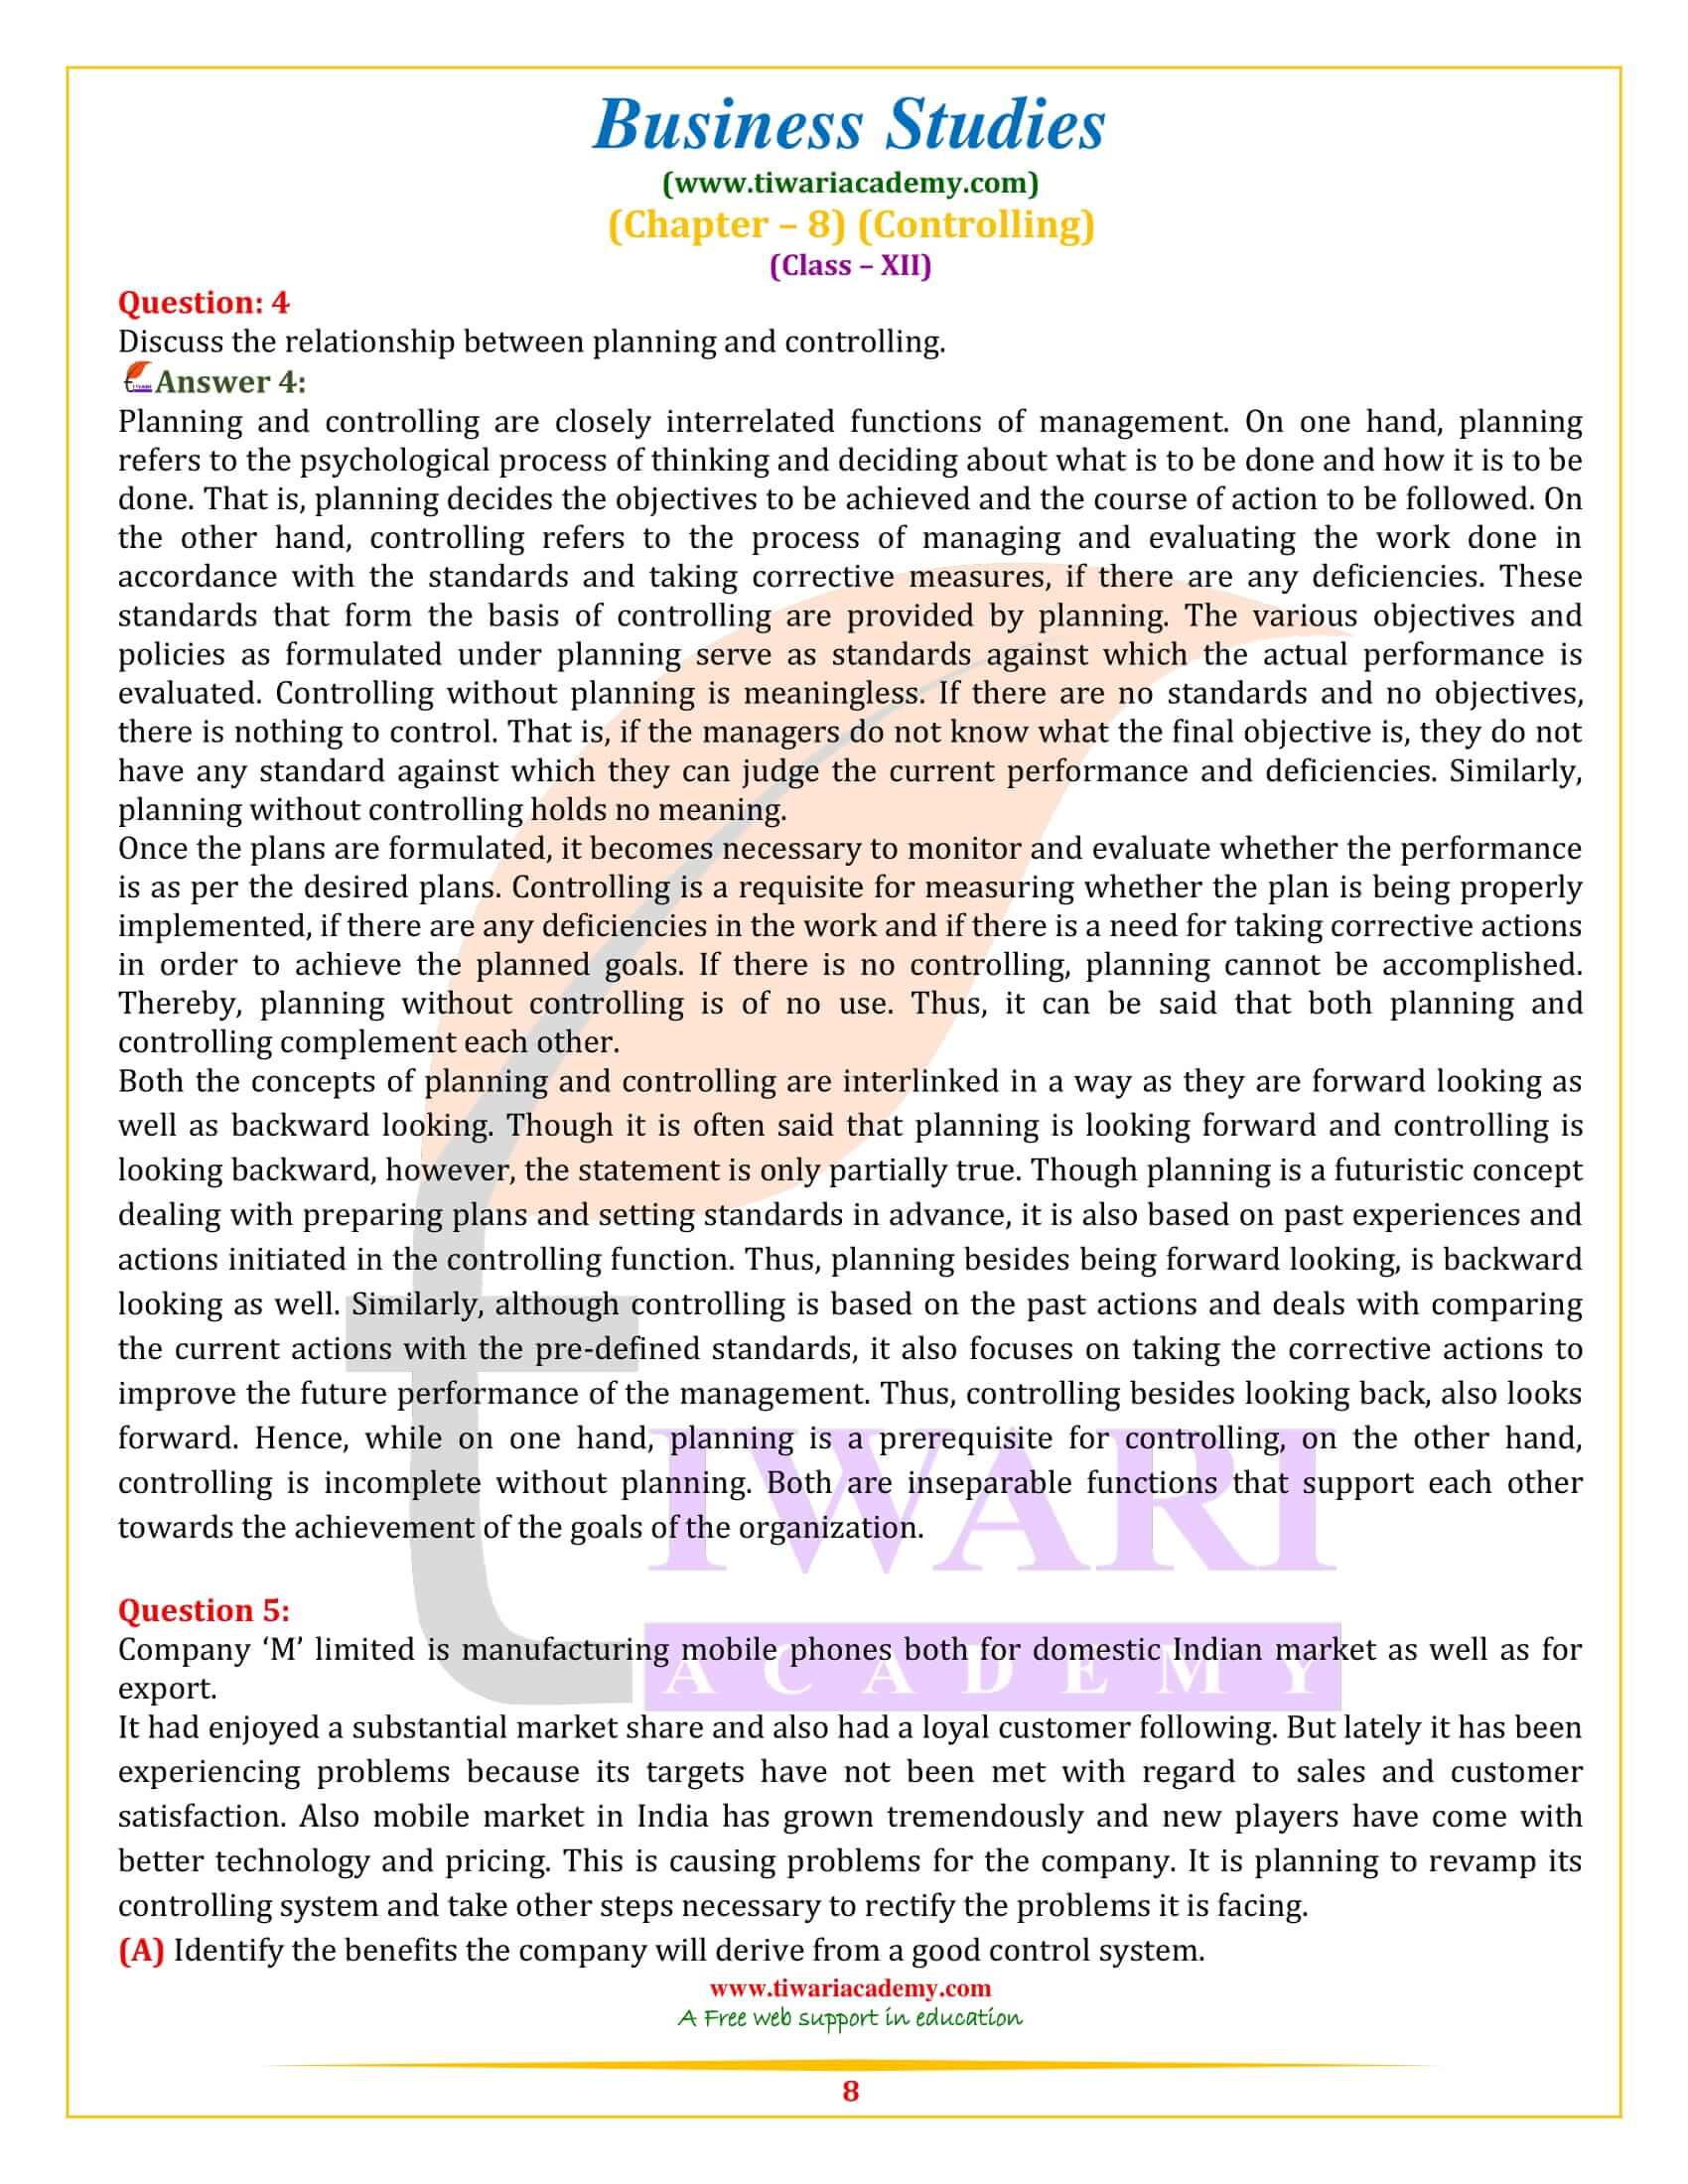 NCERT Solutions for Class 12 Business Studies Chapter 8 very short answers type